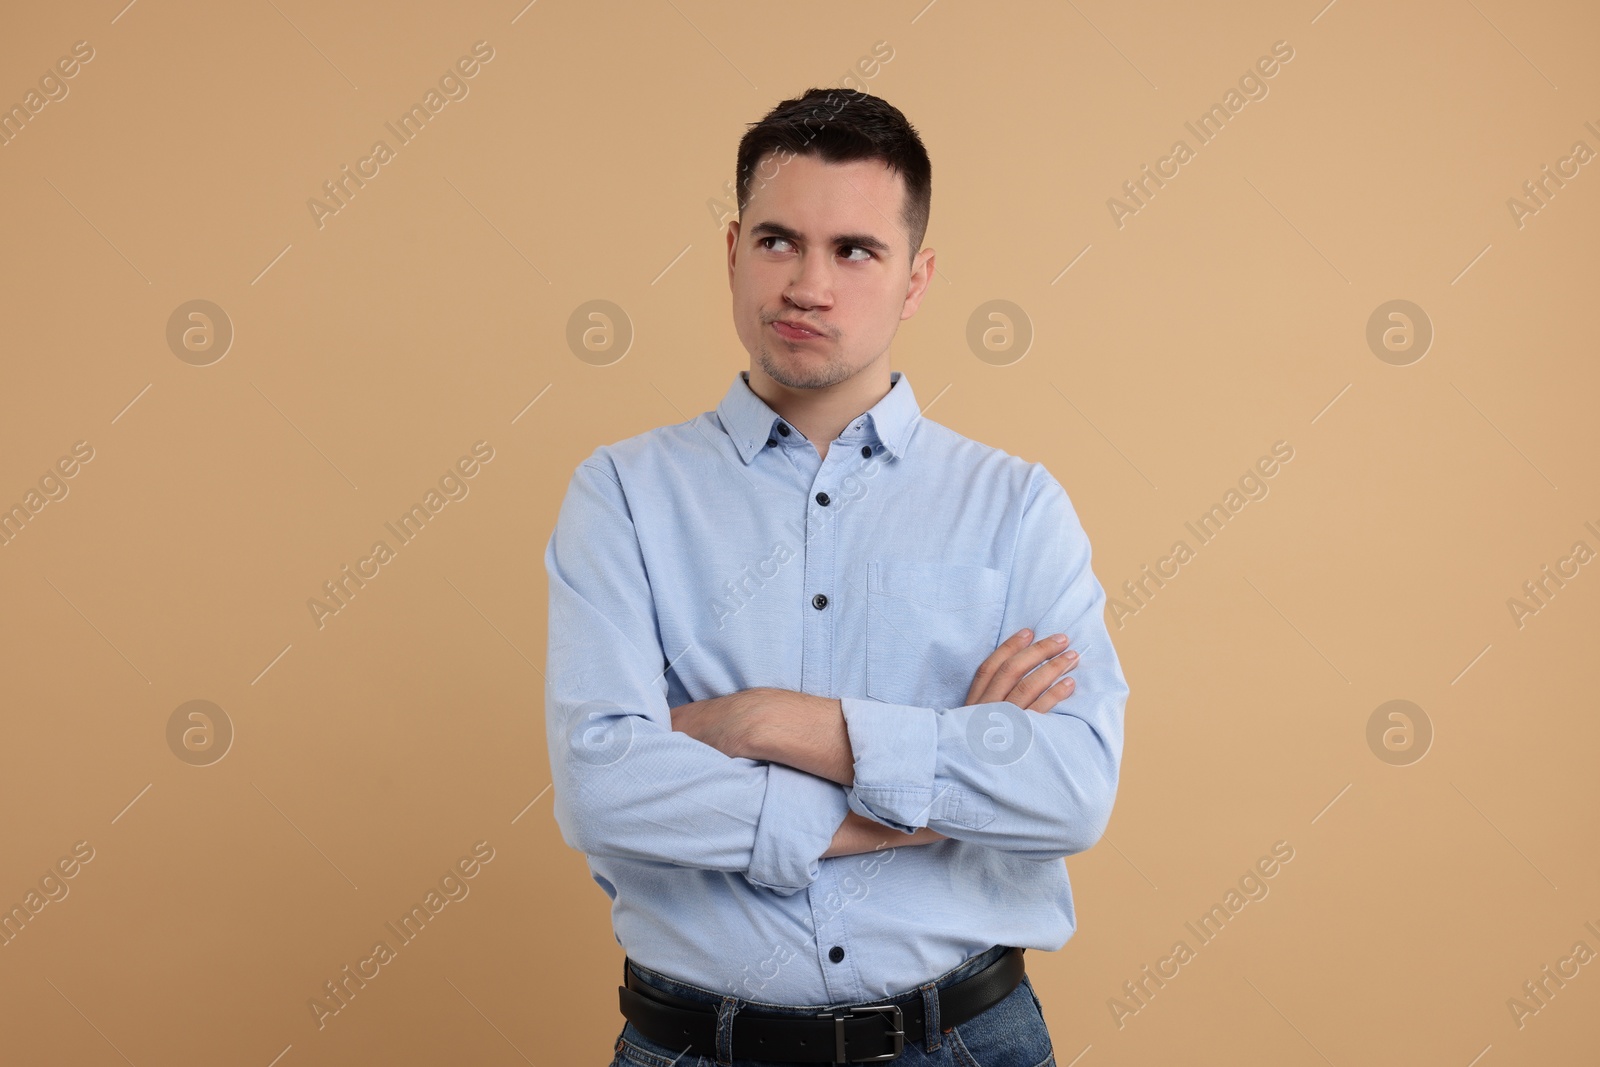 Photo of Resentful man with crossed arms on beige background